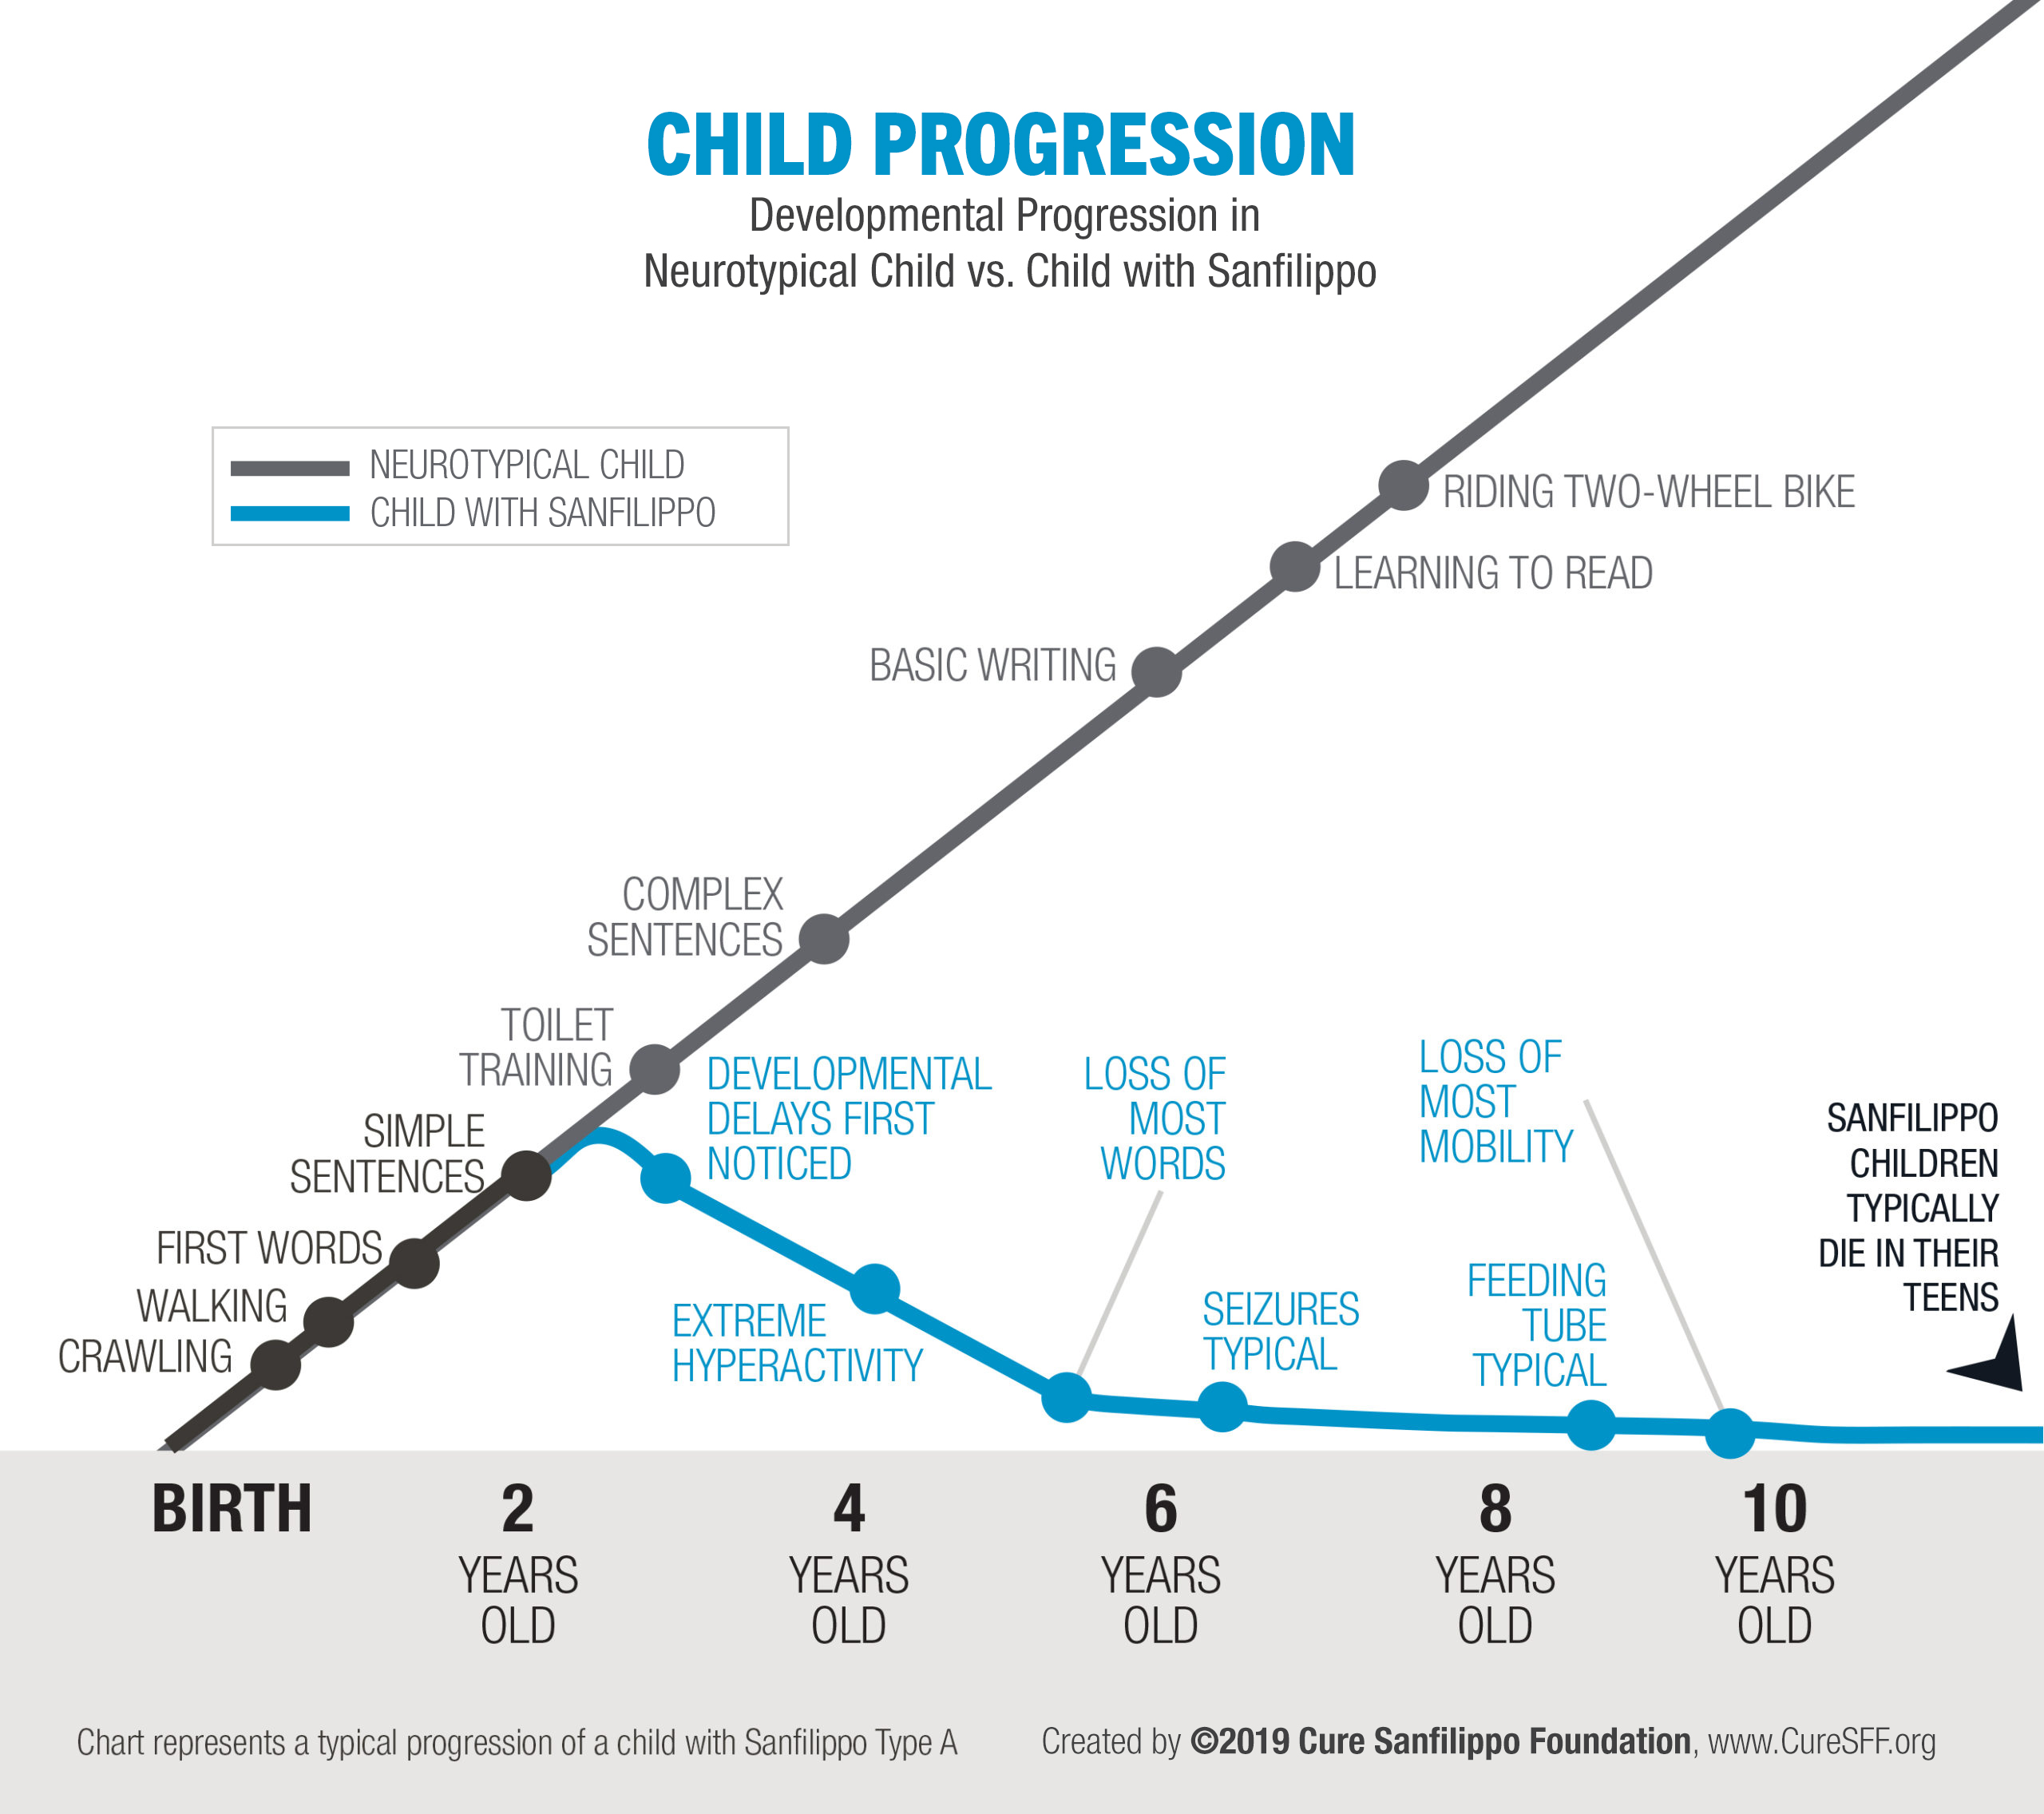 Figure depicting progressive disability of Sanfilippo Syndrome in child compared to a neurotypical child